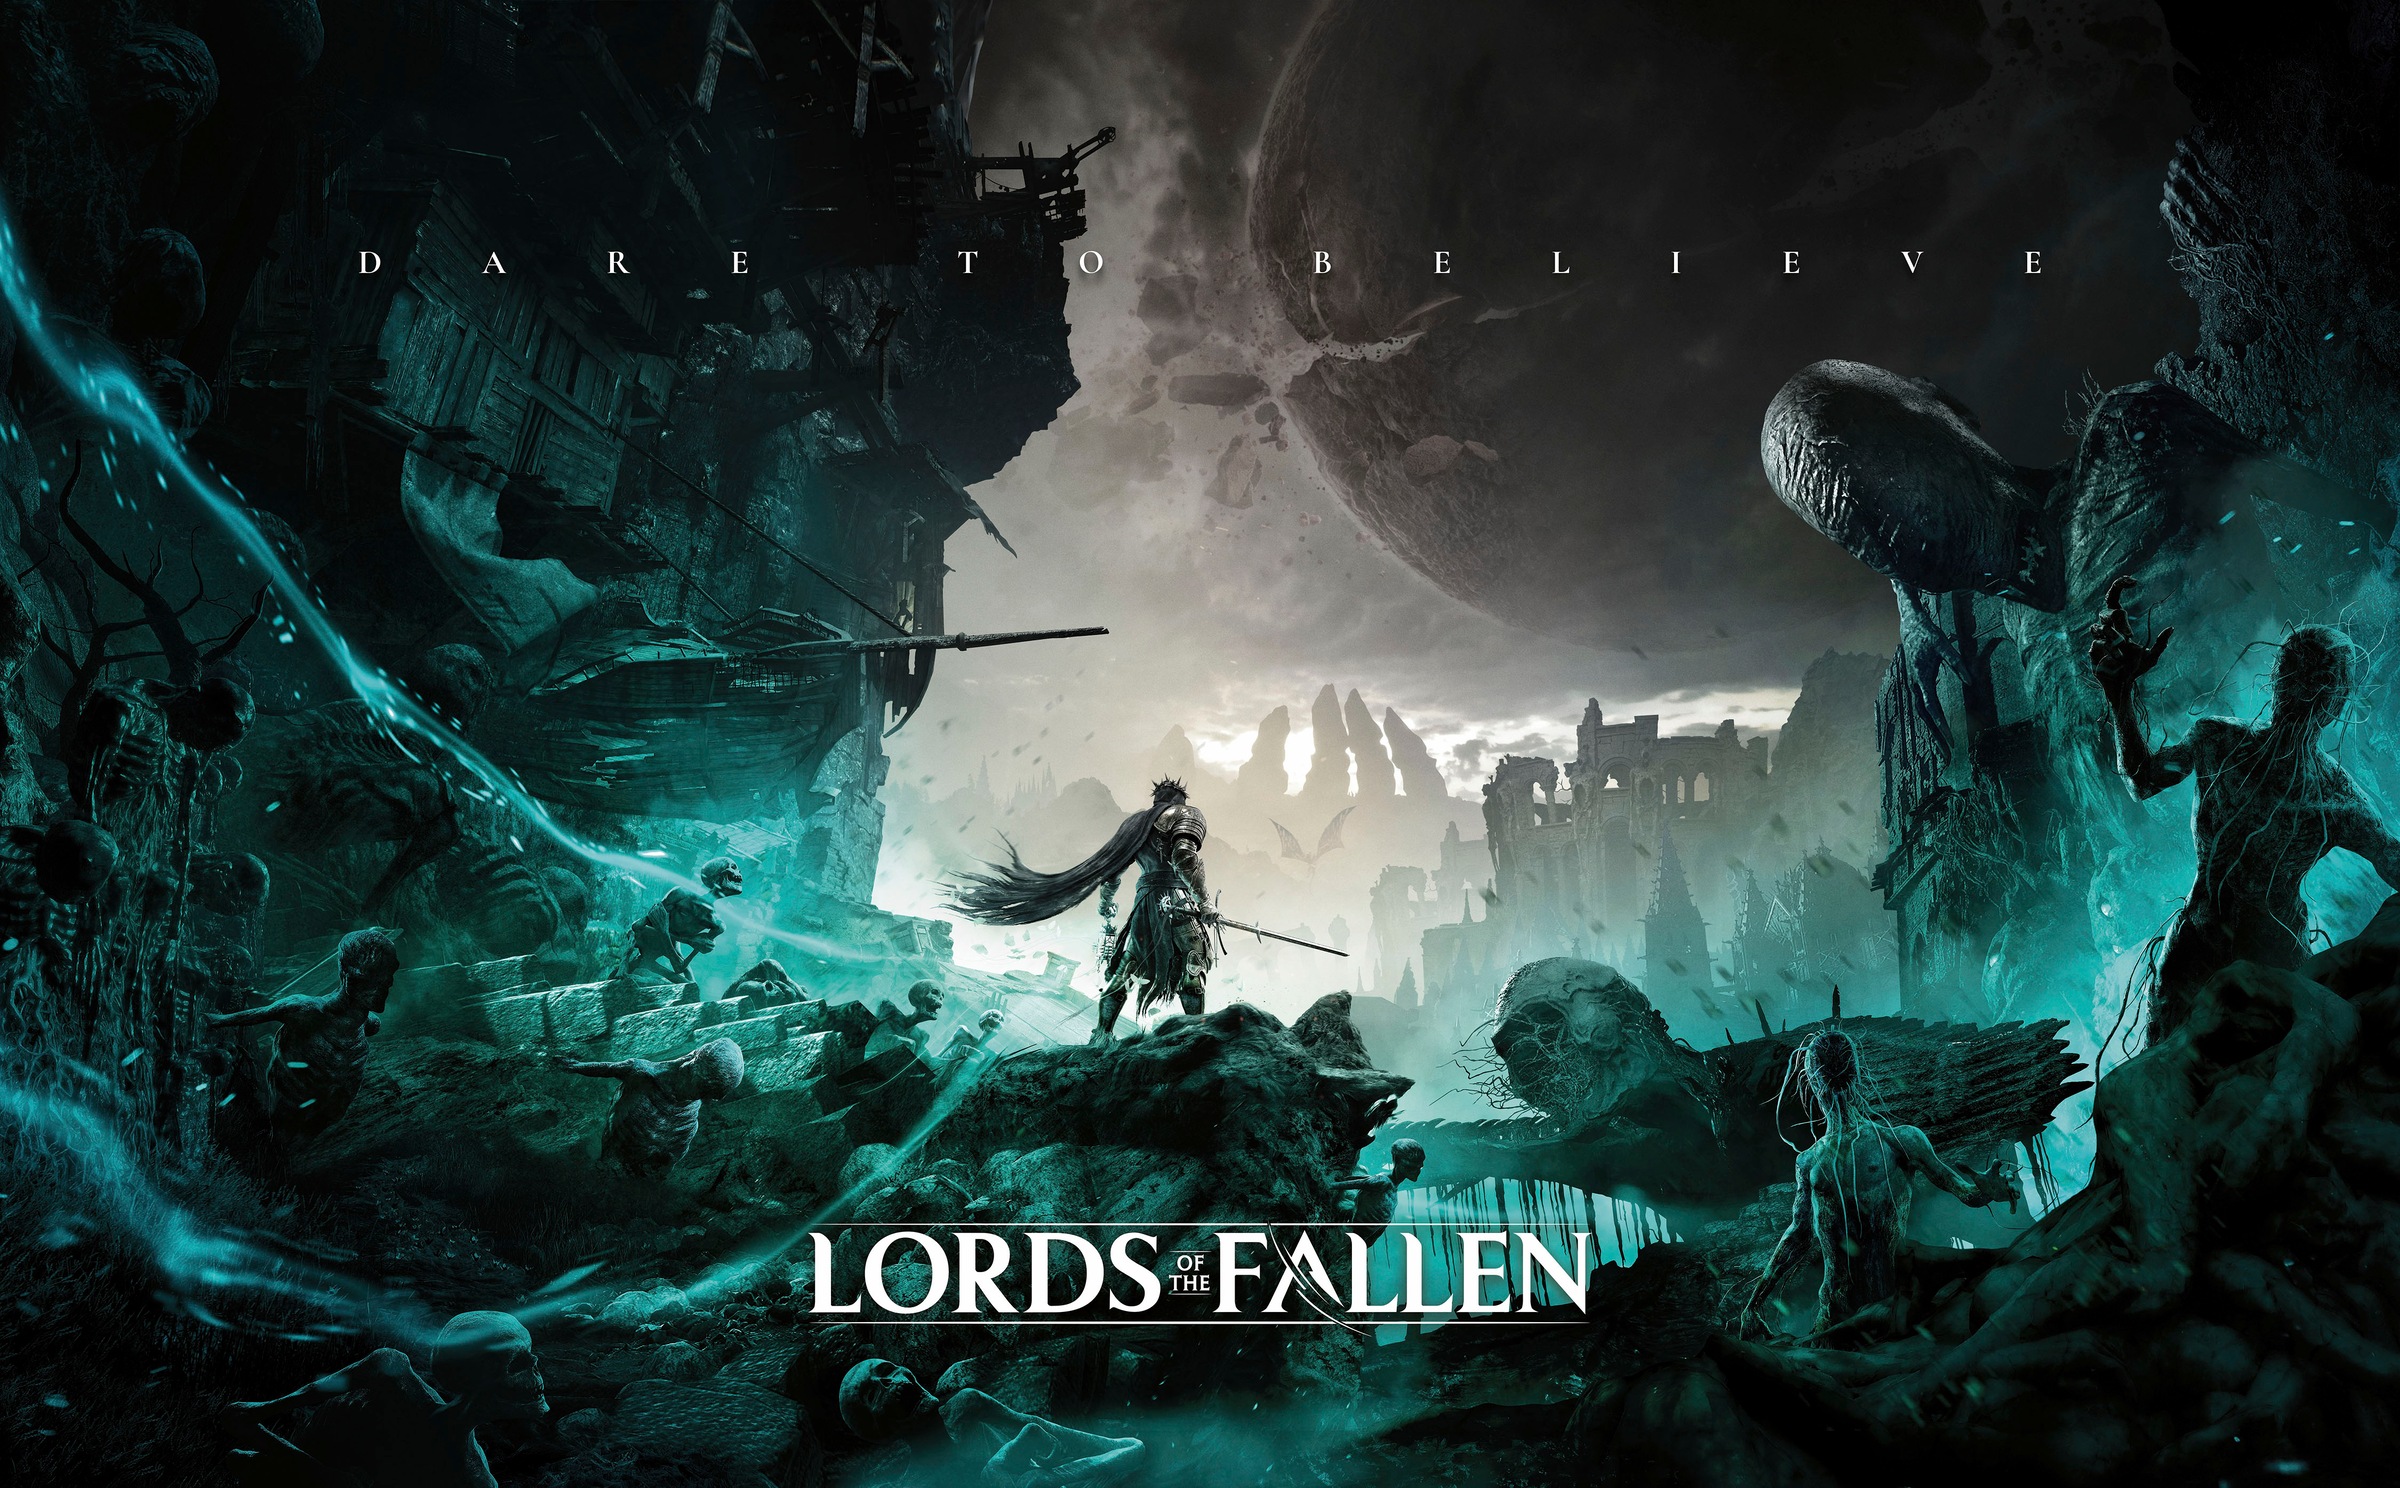 Lords of the Fallen [Deluxe Edition] for PlayStation 5